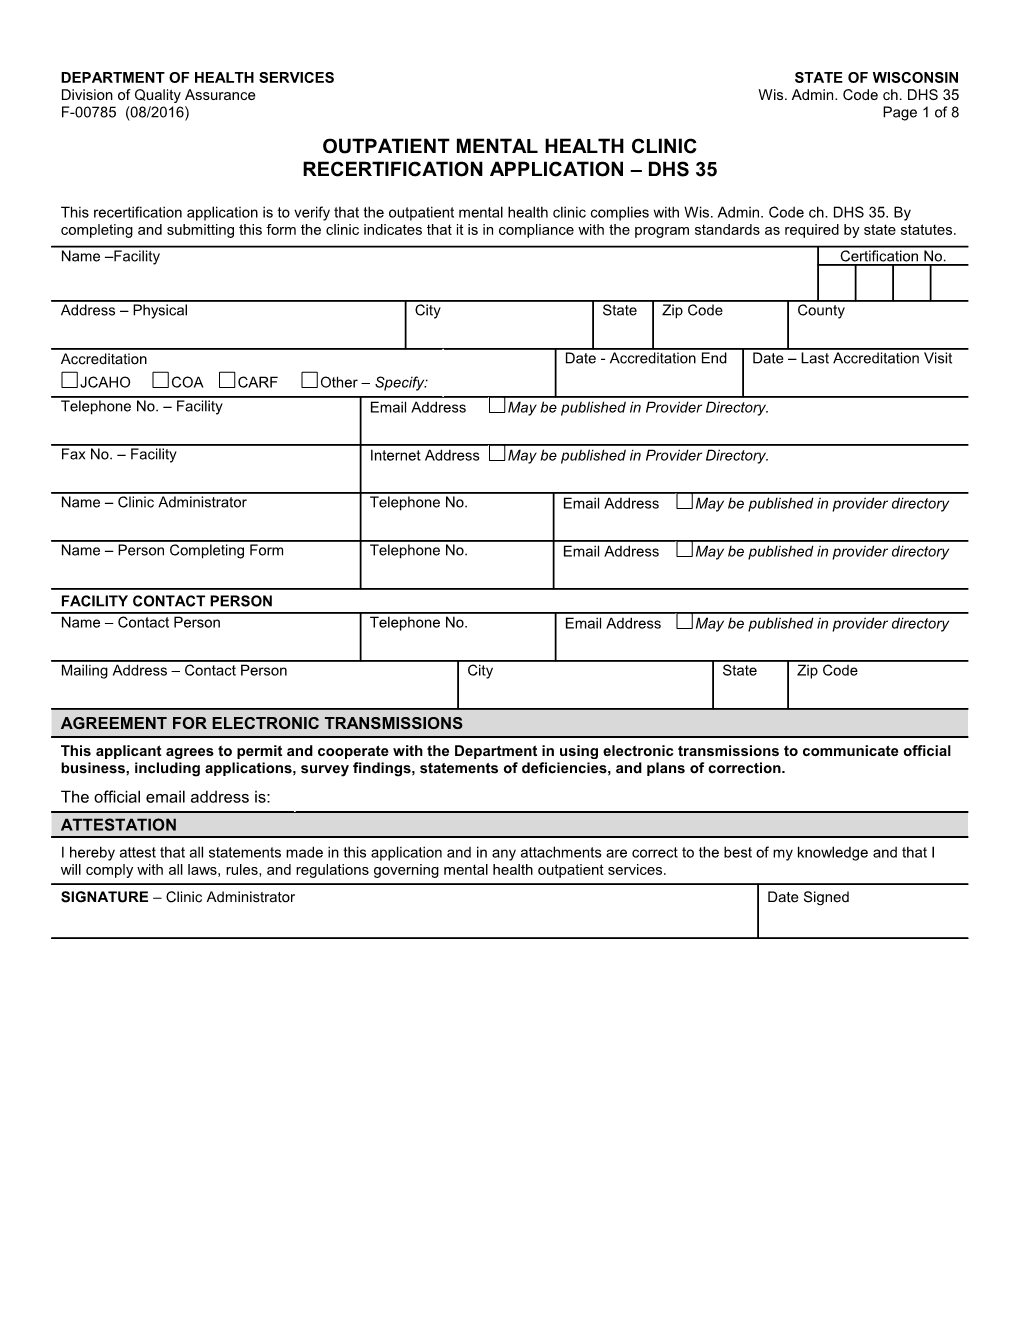 Outpatient Mental Health Clinic Recertification Application - DHS 35, F-00785